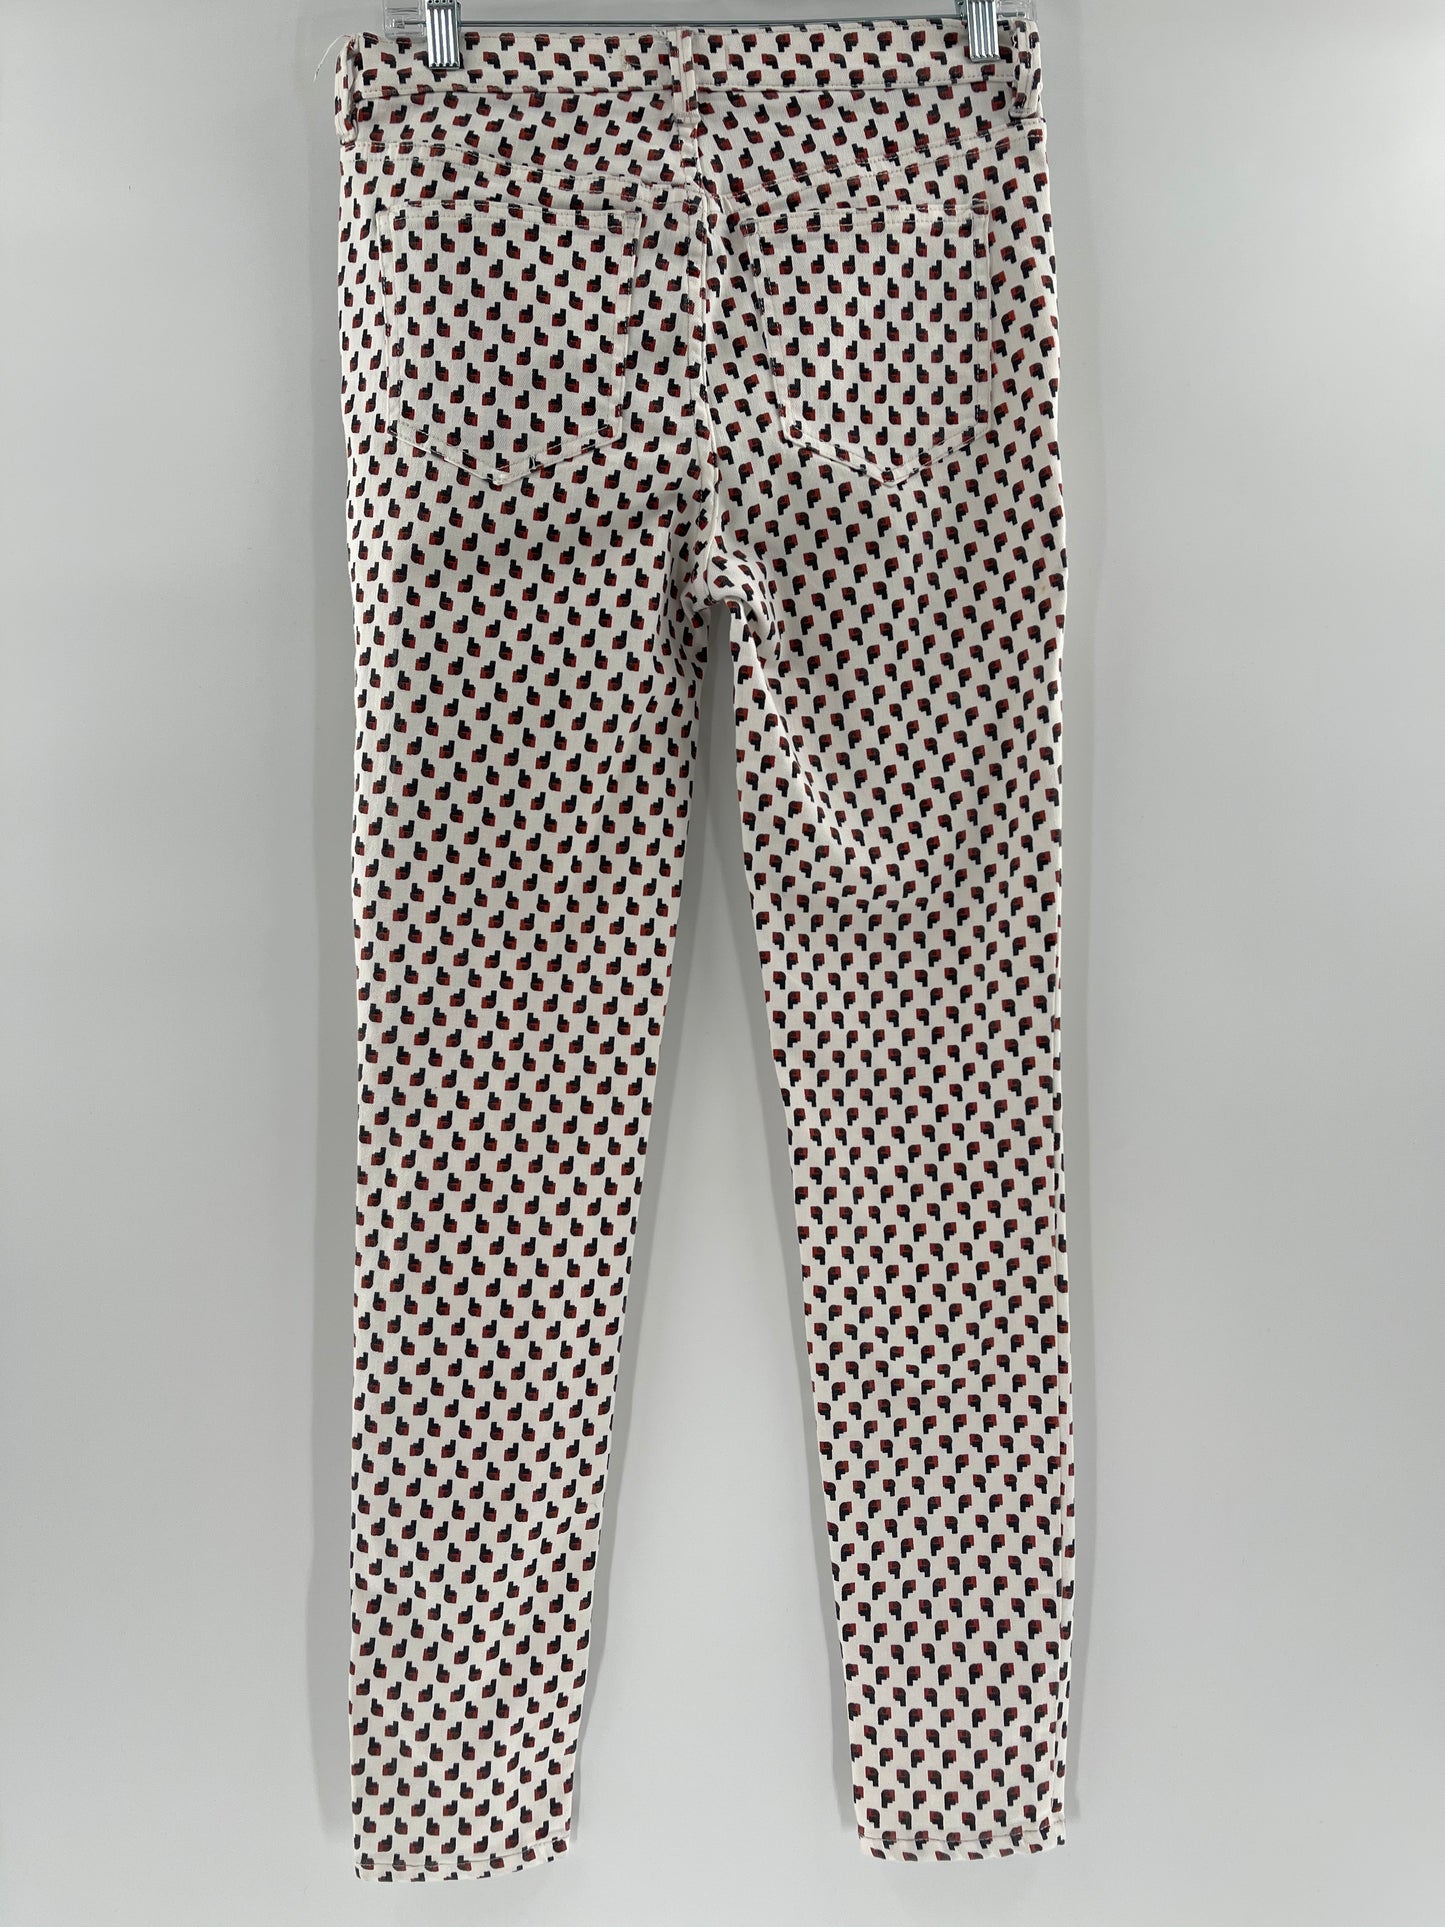 Free People Patterned Graphic Pants (Size W 27)